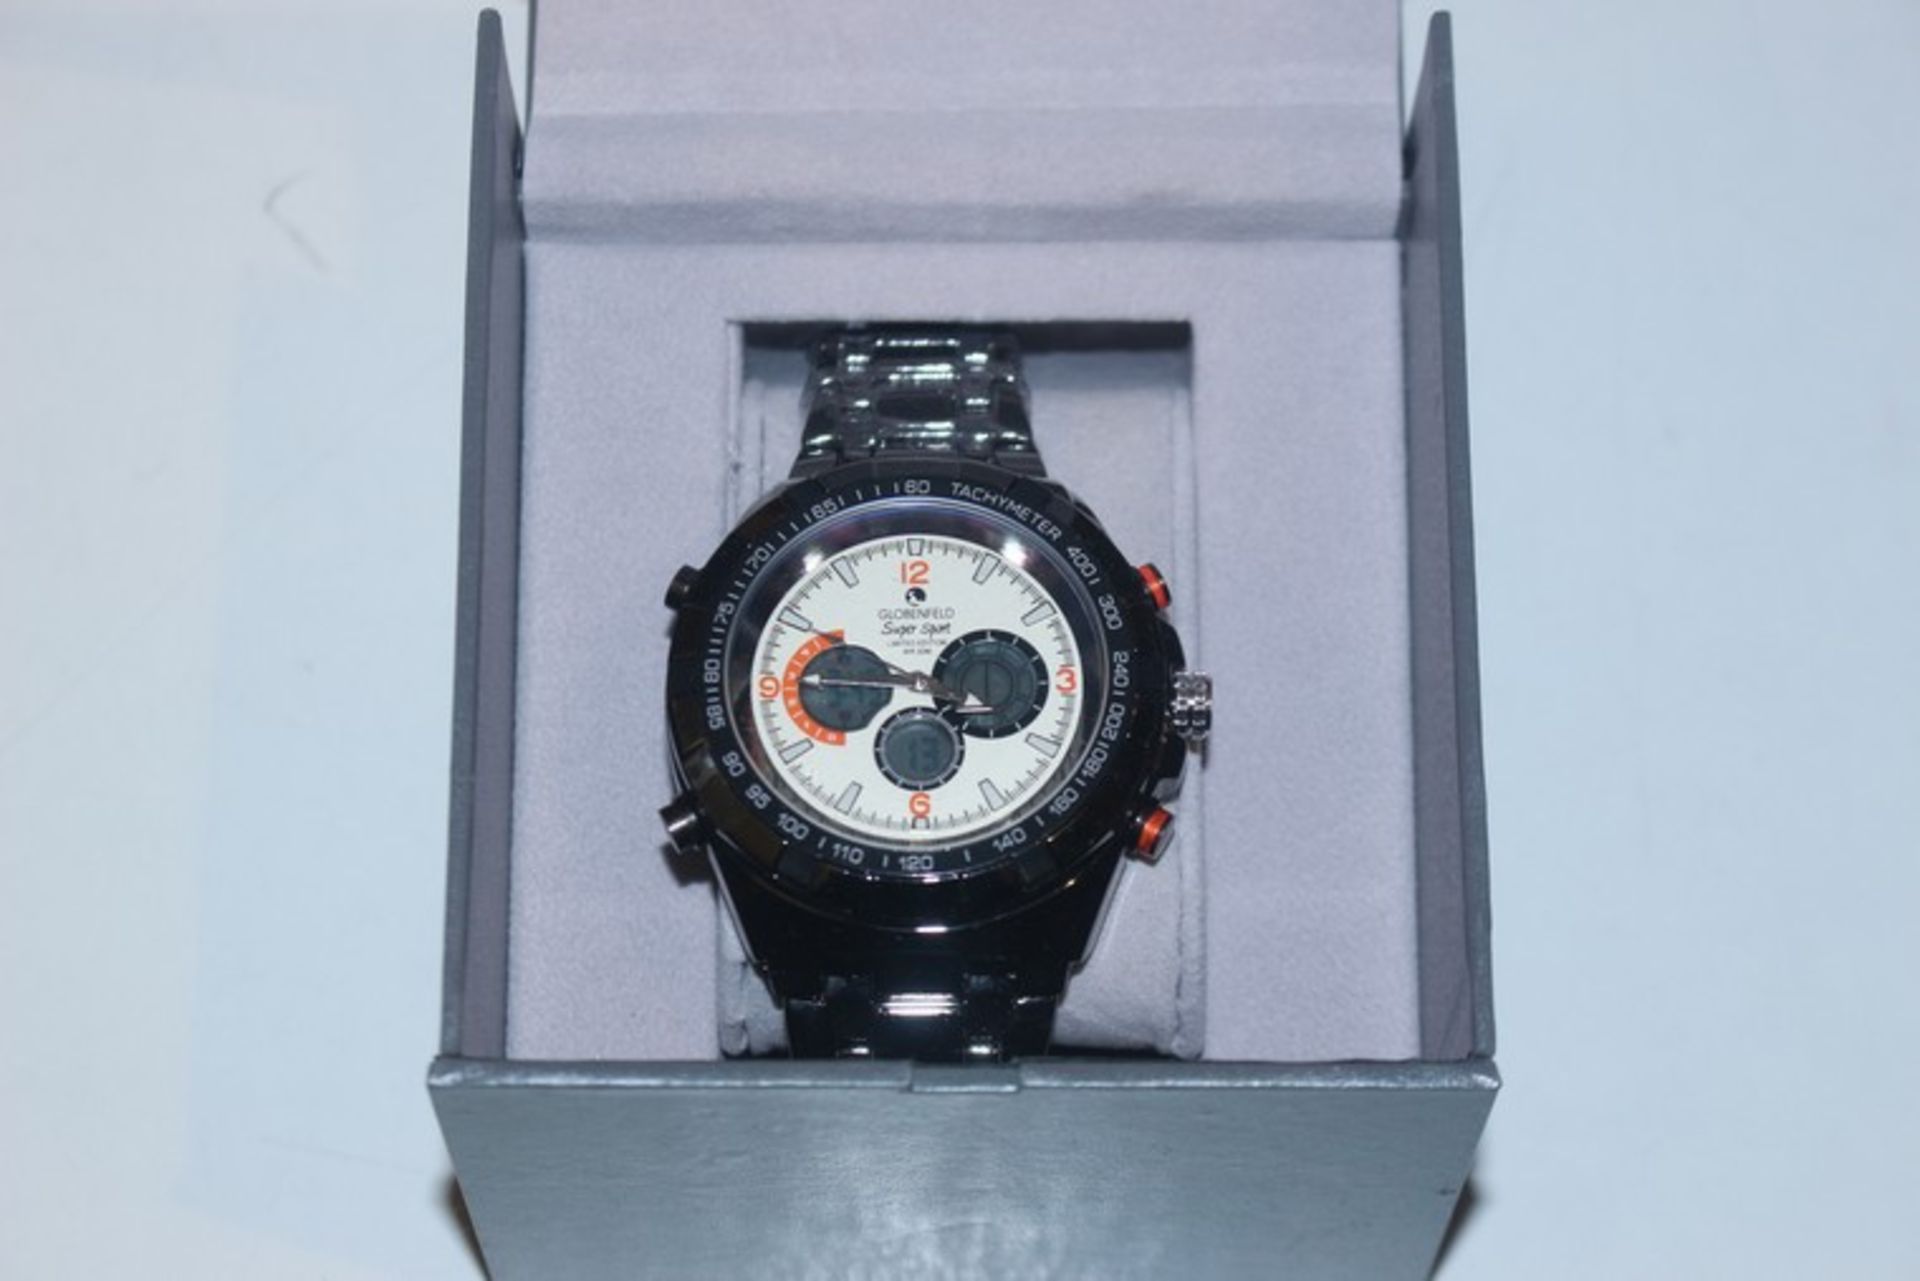 1 x MENS GLOBENFILED DESIGNER WRIST WATCH RRP £375 *PLEASE NOTE THAT THE BID PRICE IS MULTIPLIED